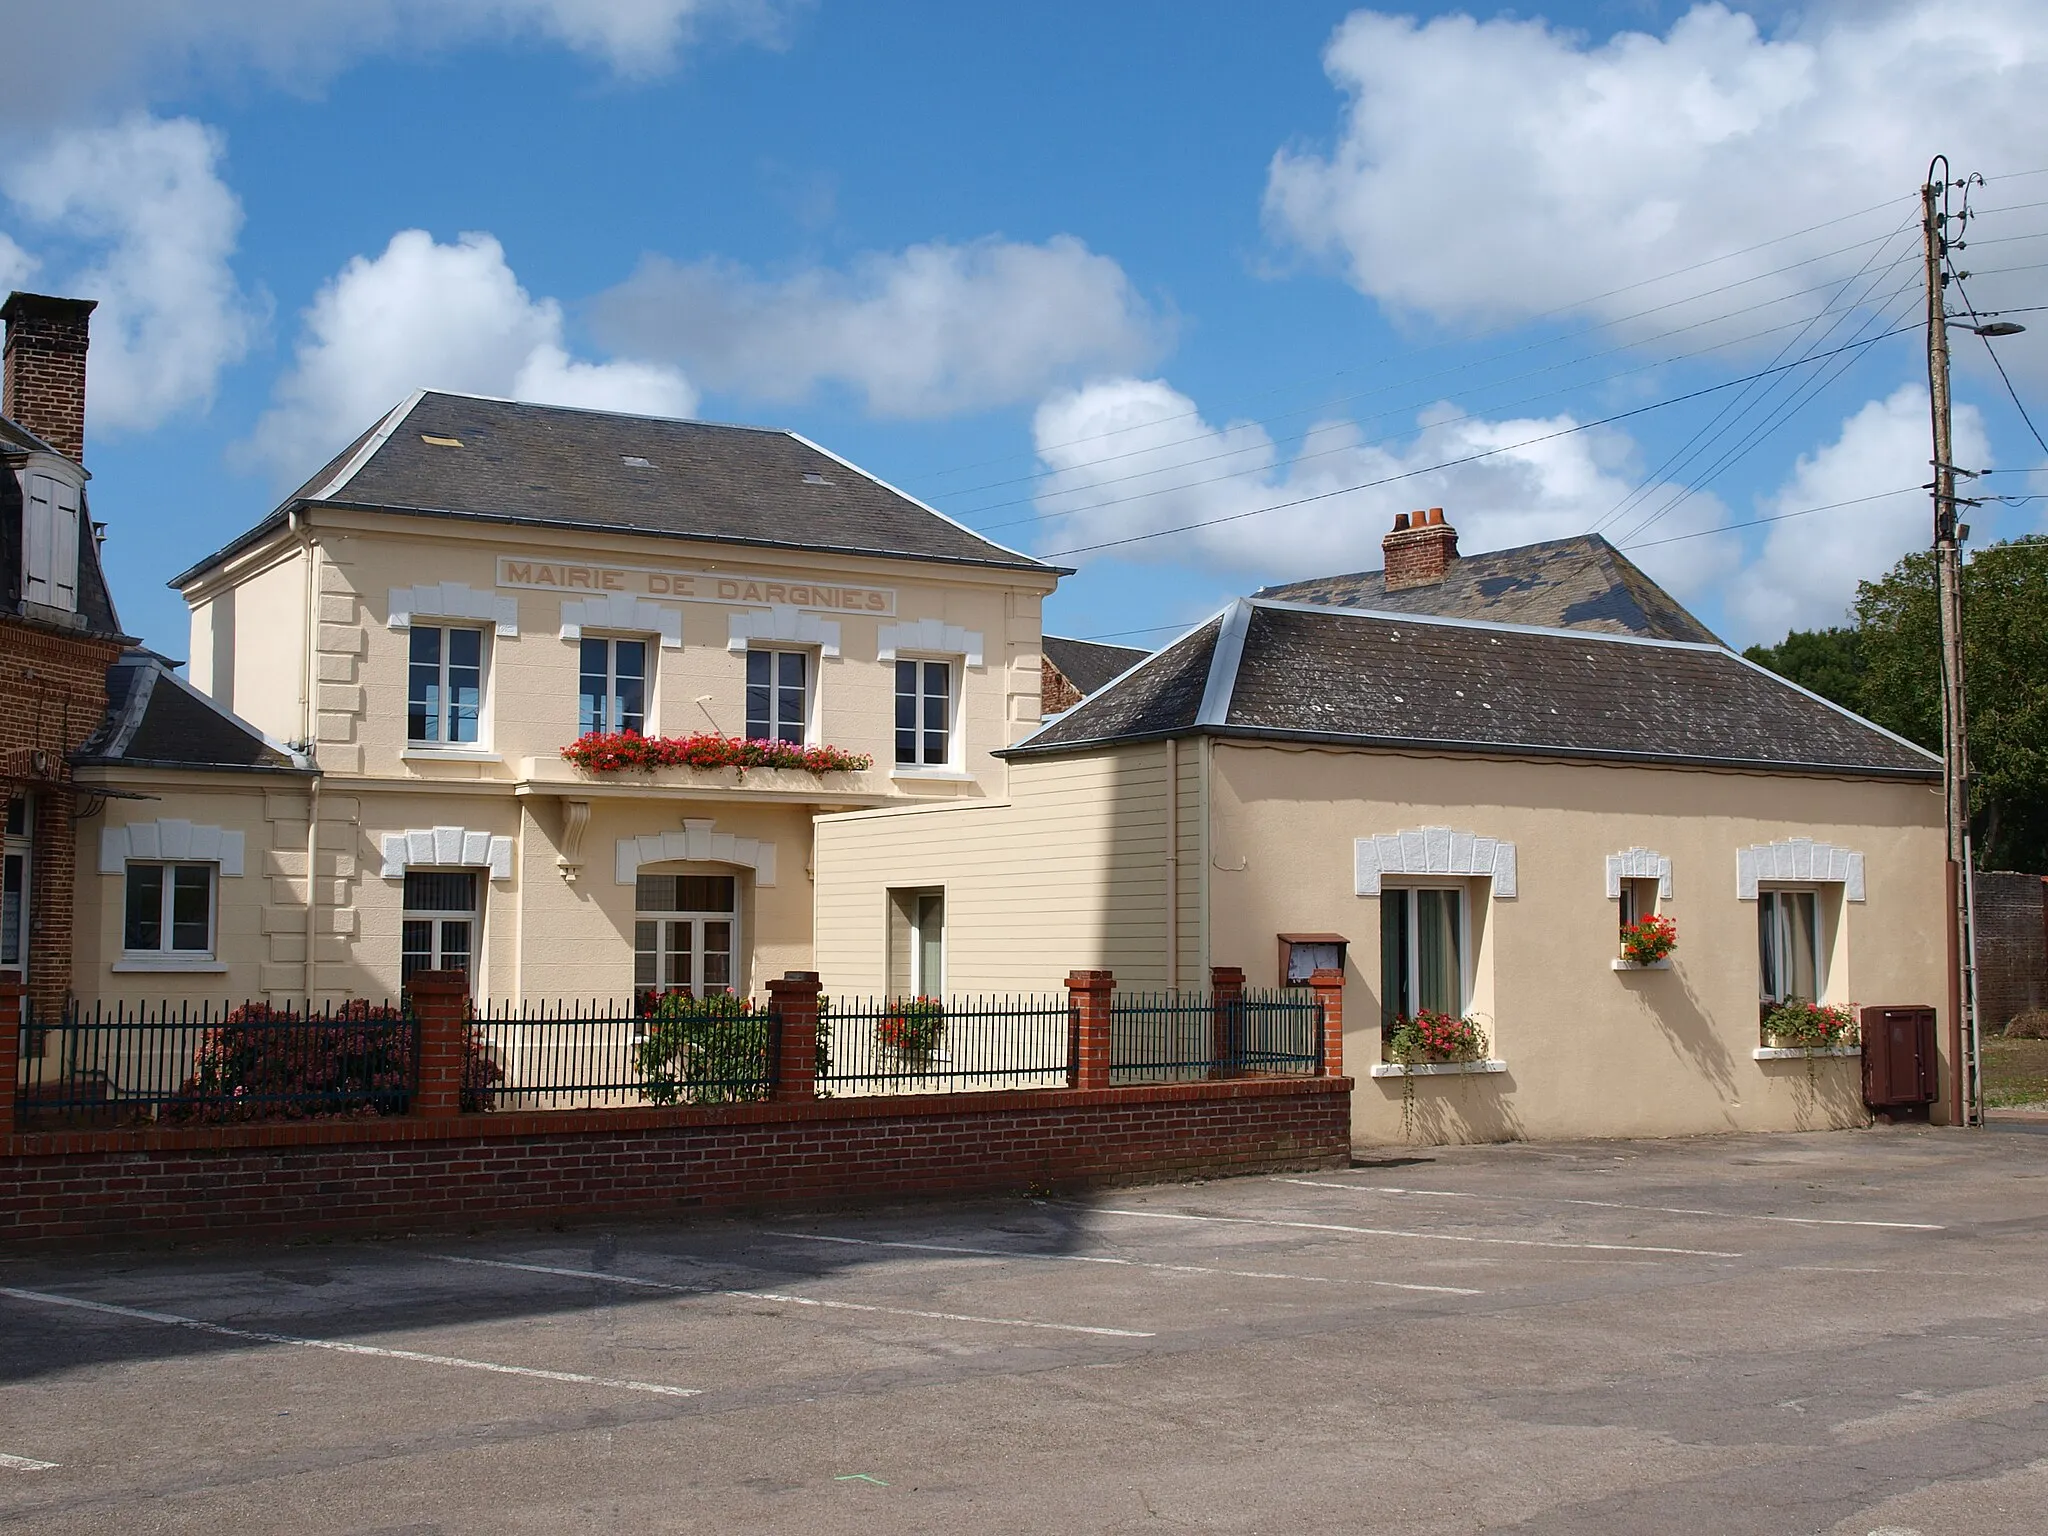 Photo showing: Mairie de Dargnies (Somme, France)